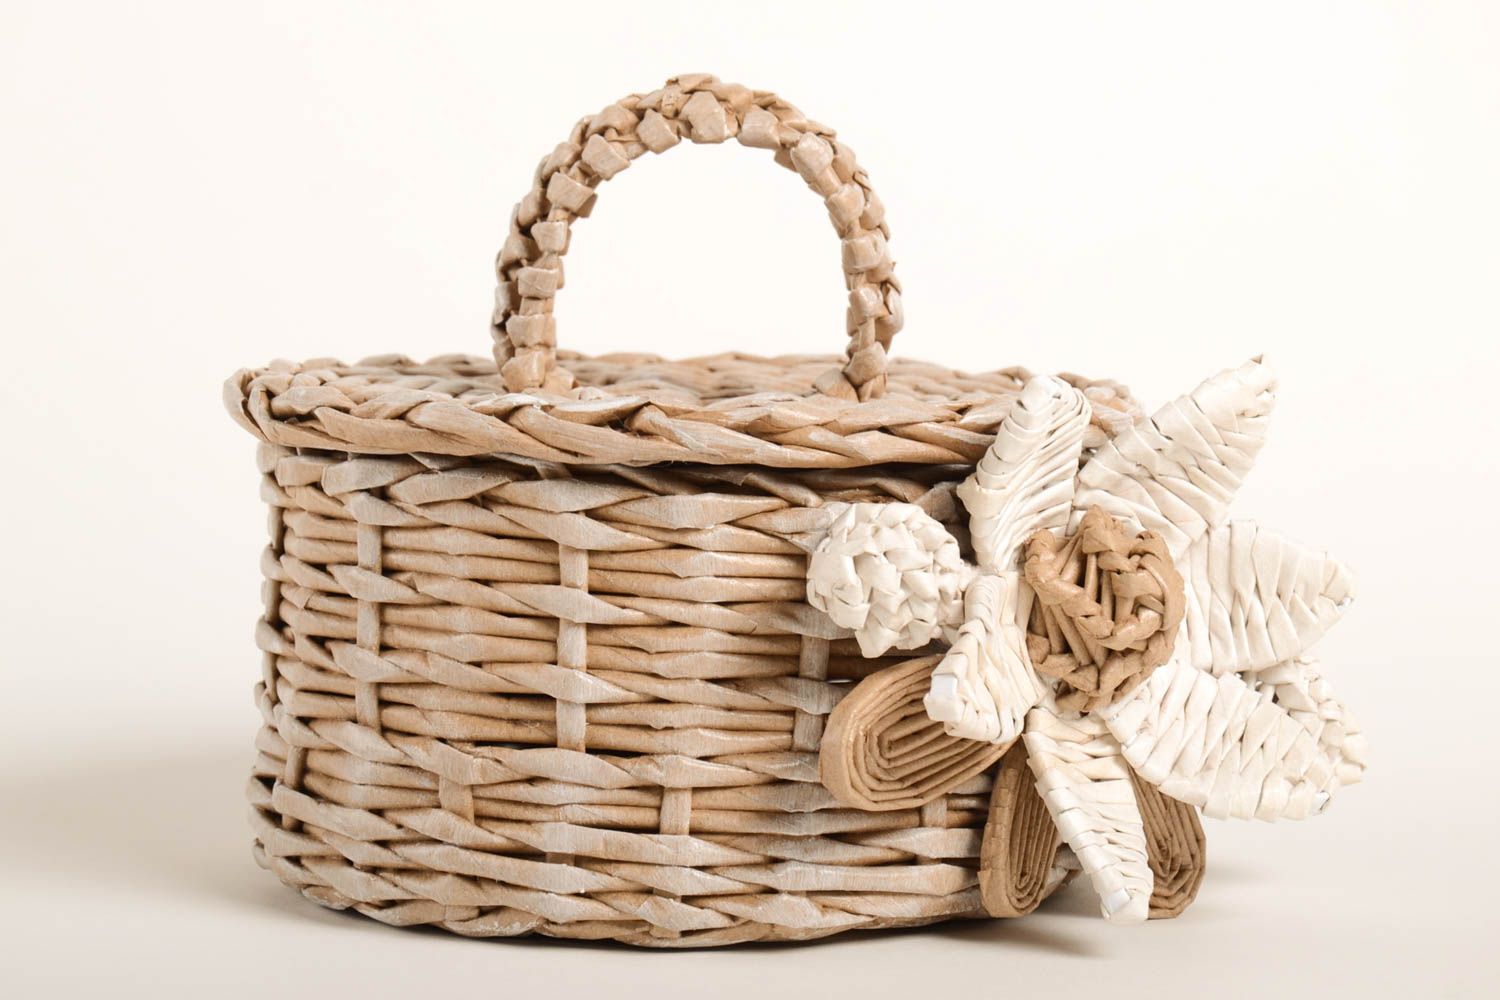 BUY Stylish handmade woven bread basket unusual home accessories lovely ...